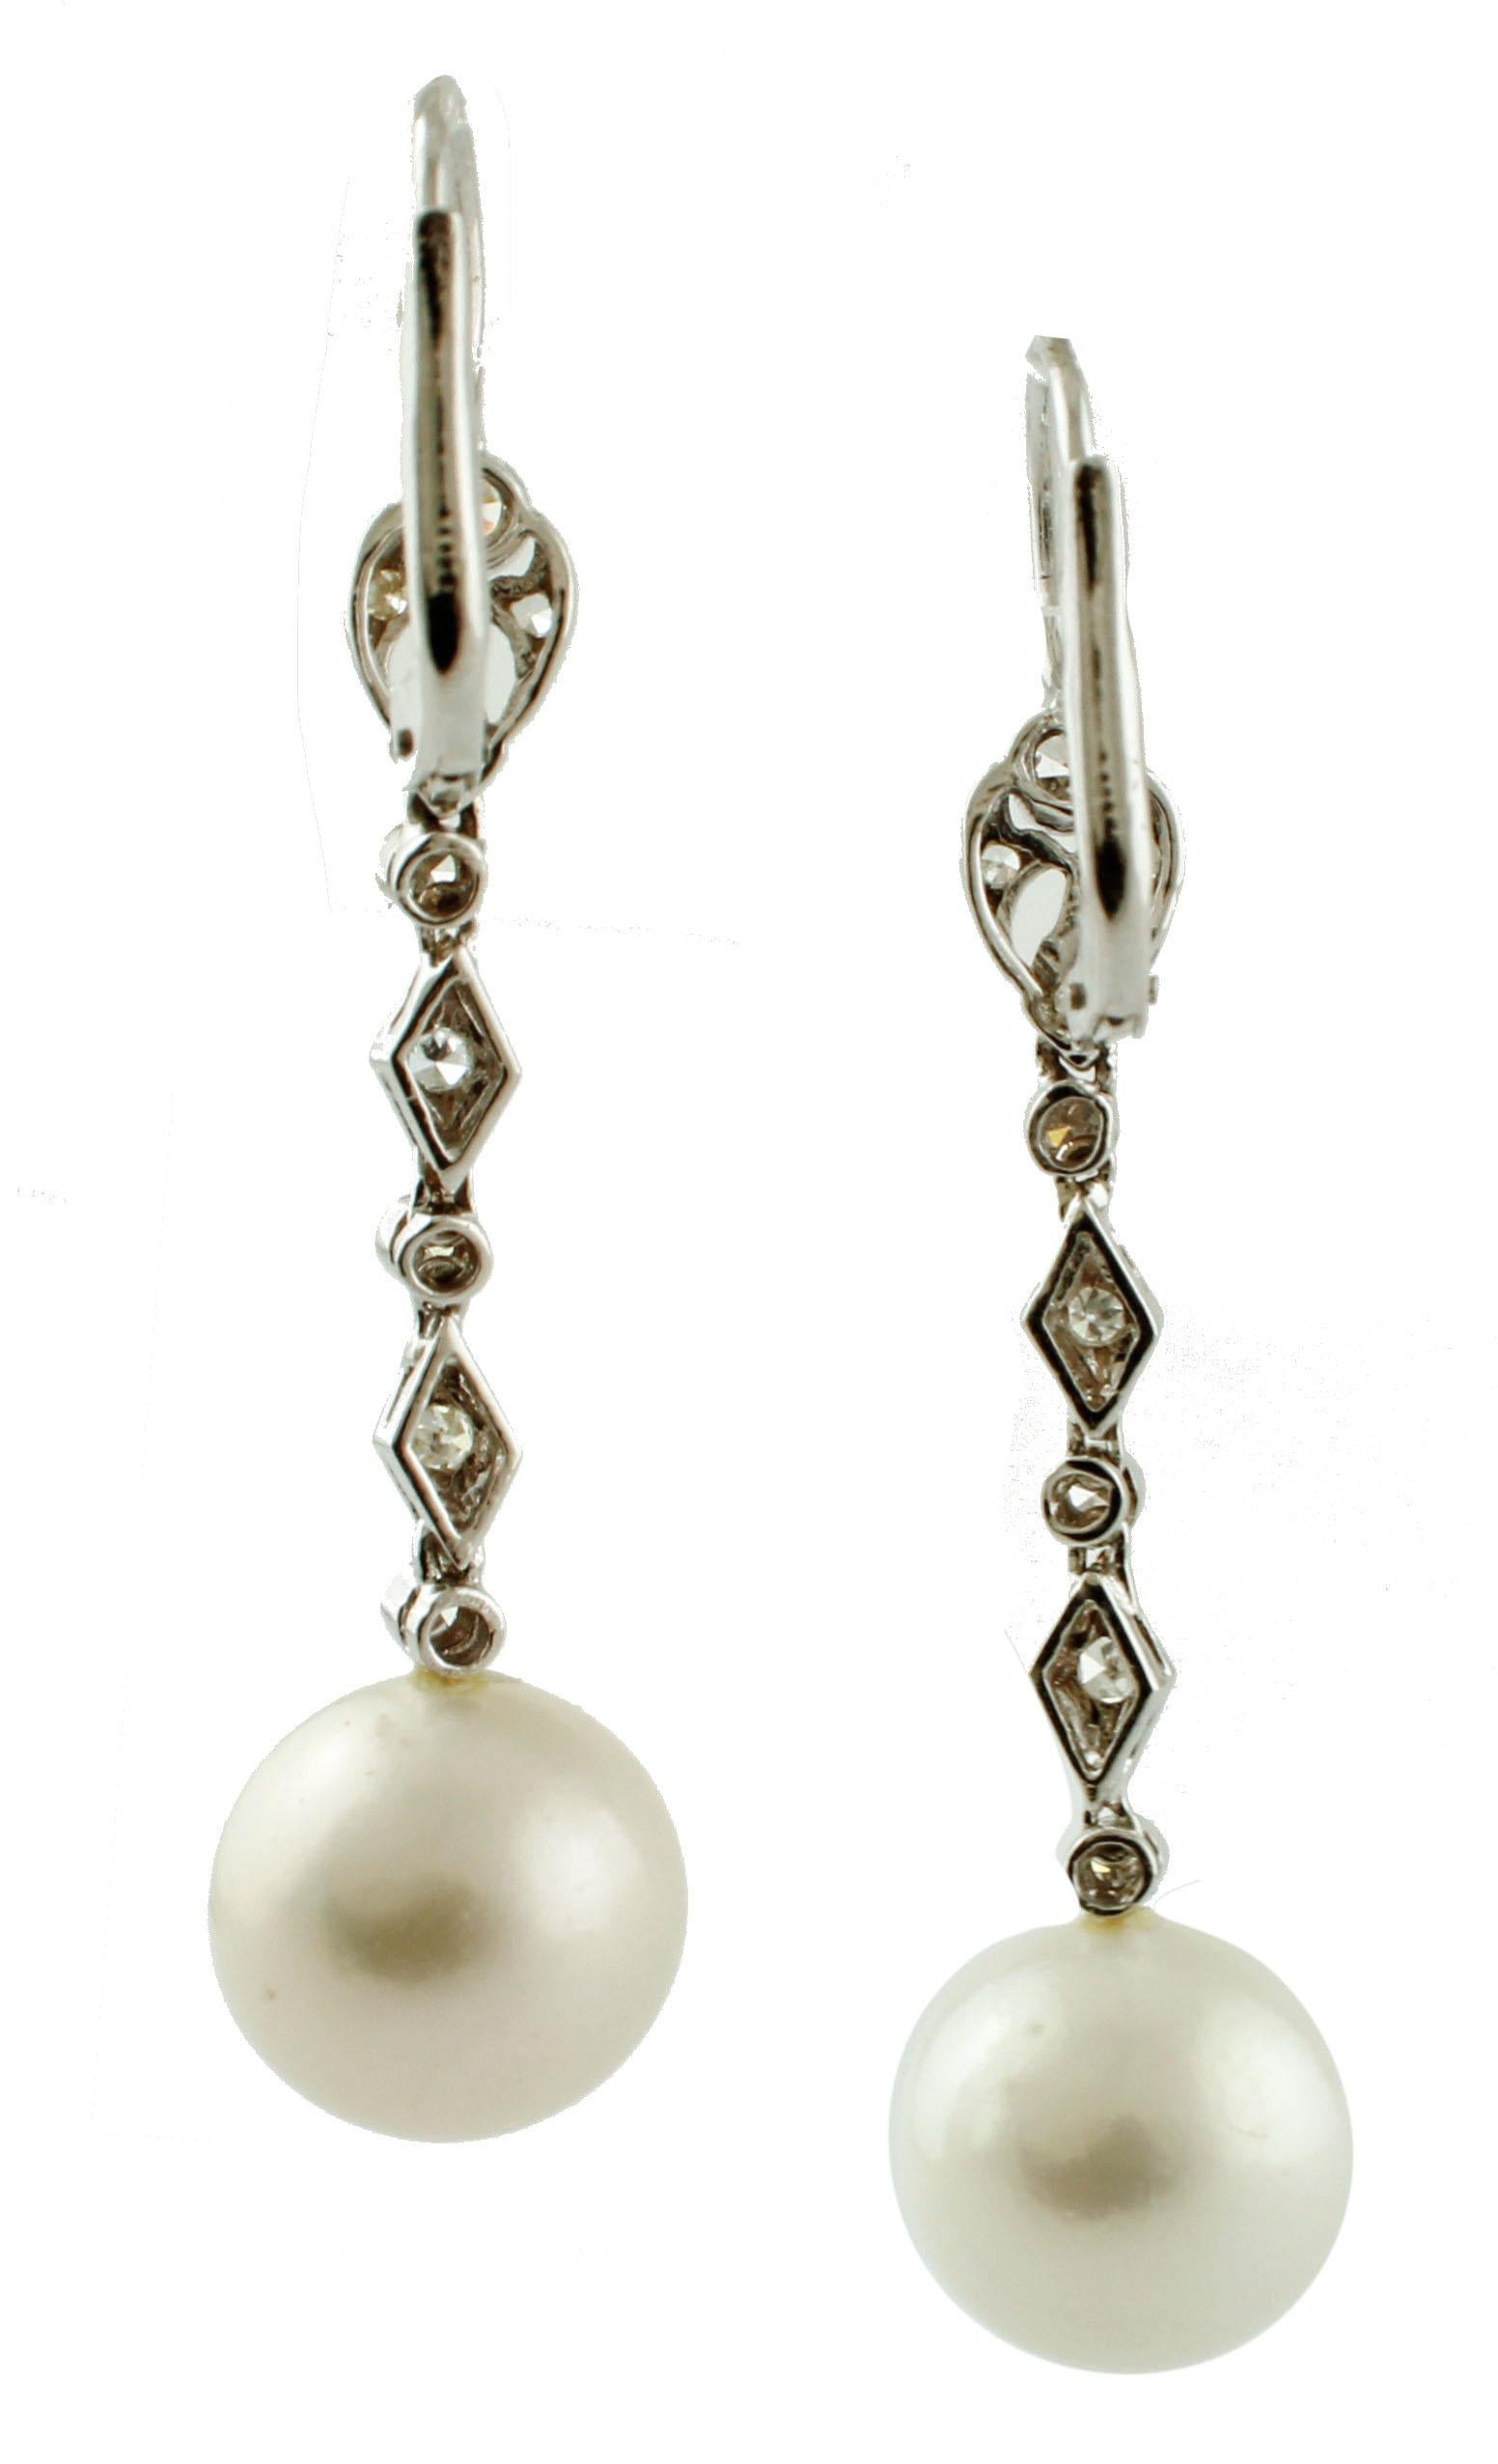 Beautiful dangle earrings in 14k white gold structure, mounted with south sea pearls as pendant and enriched with diamonds along the gold structure. 
These earrings are totally handmade by Italian master goldsmiths
Diamonds 0.51 ct
South sea pearls